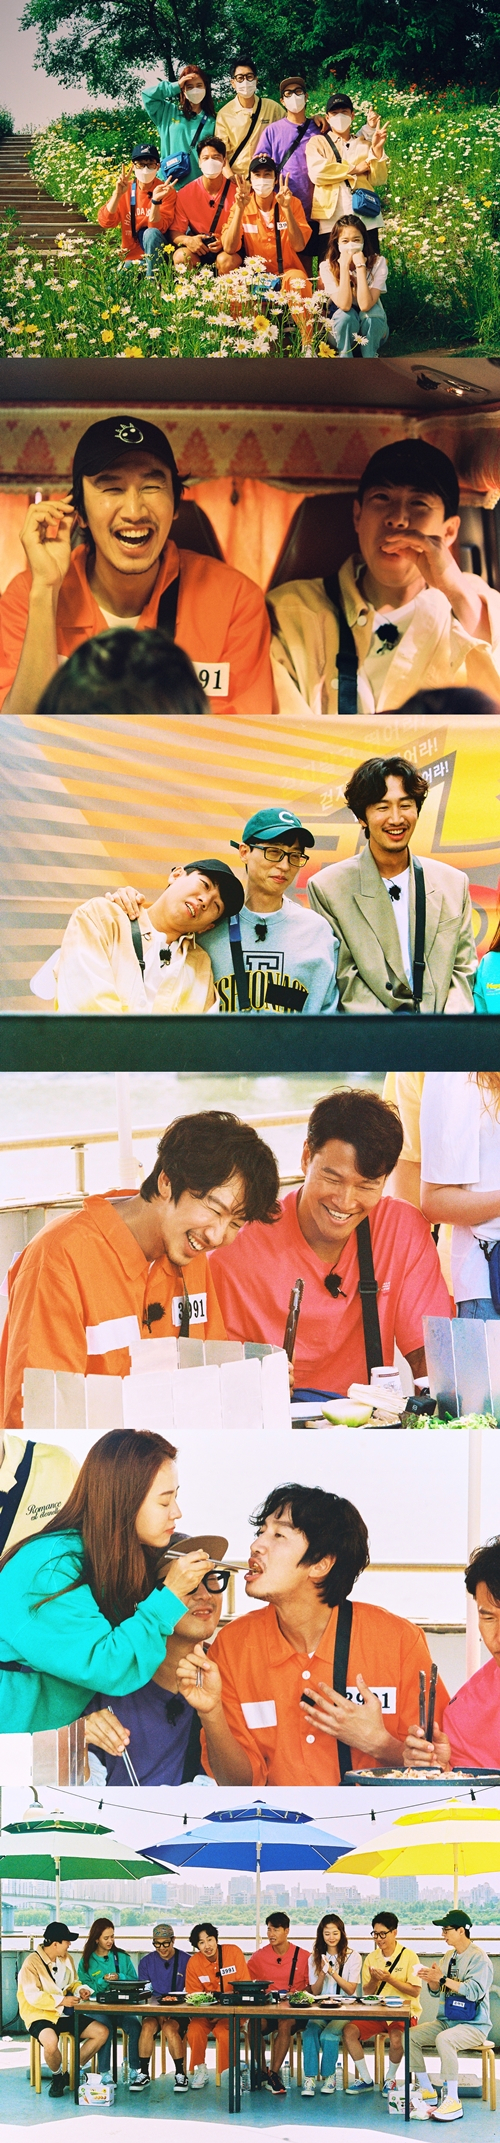 Running Man beautifully saw Lee Kwang-soo, who has been a key member for 11 years.On the 13th, SBS entertainment program Running Man featured the last race Goodbye, My Special Brother with One-year member Lee Kwang-soo.Lee Kwang-soos final shot was finished with tears and laughter at the same time.The broadcast focused on illuminating memories of Lee Kwang-soo, the cast, and the production crew. Lee Kwang-soo was in memories from the beginning to the end of the broadcast.The production team asked if there was anything I wanted to go, eat, and do as it was the last shot in the pre-meeting.Lee Kwang-soo delivered the opinion that he would like to go to the SBS rooftop again 11 years ago when he first filmed Running Man.Then, I recalled the memory that the members enjoyed at the LP bar, the memory of eating pork belly and chicken noodles, and added to the feeling of thinking more about the members than myself.The production team conducted the final shoot based on Lee Kwang-soos answer: It started on the SBS rooftop where it was first shot and finished filming at the LP bar.Lee Kwang-soo did not miss the pork belly and kalguksu that he said he wanted to eat with the members.The members tapped Lee Kwang-soo, who picked pork belly in hot weather, and Yoo Jae-Suk laughed, saying, Lets just go in today and get off after the special feature.The mission, which is essential to Running Man, also focused on memories. The beginning of the mission began with a reminiscence of the crew.The crew monitored the entire round, which featured Lee Kwang-soo for 11 years.In Running Man, Lee Kwang-soos alleged property damage, assault, performance pornography, and fraud are 1050 years in prison, Lee Kwang-soos sentence is reduced to 1050 years in prison.Lee Kwang-soo received prisoner number 3991; the number 3991 was a 10-year, 338-day time for Lee Kwang-soo with Running Man.The crew planned missions such as meeting questions about Lee Kwang-soo, imitating Lee Kwang-soo vocalization, and taking pictures with Lee Kwang-soo, and prepared a race where members could build memories together.When Yoo Jae-Suk correctly met Lee Kwang-soos fathers name, Lee Kwang-soo burst into tears that he endured.Lee Kwang-soos departure feature was portrayed as members actively participating in the game and struggling to give him a gift.However, it was revealed that there was a day of Lee Kwang-soo who thought about the members without knowing the whole shooting.The members received a Hidden mission to take as many pictures as possible with Lee Kwang-soo before shooting.The members could not hide their expectations when Lee Kwang-soo received the products he received in the order of taking a lot of pictures.Lee Kwang-soo, on the other hand, received the Hidden mission of taking the same number of pictures with all members and making it the first place.The product that the production team said was prepared for Lee Kwang-soo was actually a gift that Lee Kwang-soo prepared for each member after worrying about each other.Lee Kwang-soo moved to the place throughout the filming and took the same number of pictures as the members to naturally deliver gifts to the members of Running Man who usually refuse gifts.Members who learned that they had carried out Hidden missions for them on the special day of getting off burst into tears.The sincere last farewell of the members and staff members who have been together has also been impressed.The members reduced all of Lee Kwang-soos sentences of 1050 years and wrote a letter to Lee Kwang-soo to convey the heart that they had not spoken in the meantime.The 112 staff also added to Lee Kwang-soos gratitude for Lee Kwang-soo, who had written and handed over rolling paper.On this day, when everyone was tearful, the broadcast gave a beautiful farewell to Lee Kwang-soos application song Now Goodbye at the LP bar and played as an icon of betrayal.The respectful last greetings of the performers and crew members of the 11-year-old members have relieved the fans who have to leave Lee Kwang-soo.Lee Kwang-soo, on the other hand, confessed that he had made a pleasant memory every week for the past 11 years, receiving excessive love thanks to members such as family, staff, and fans who always give one.I dont have enough words to convey all of this Thank You, but Ive sincerely thanked you for it, he said, I love you, and ended the eleven-year long journey.Choi Soo-jin